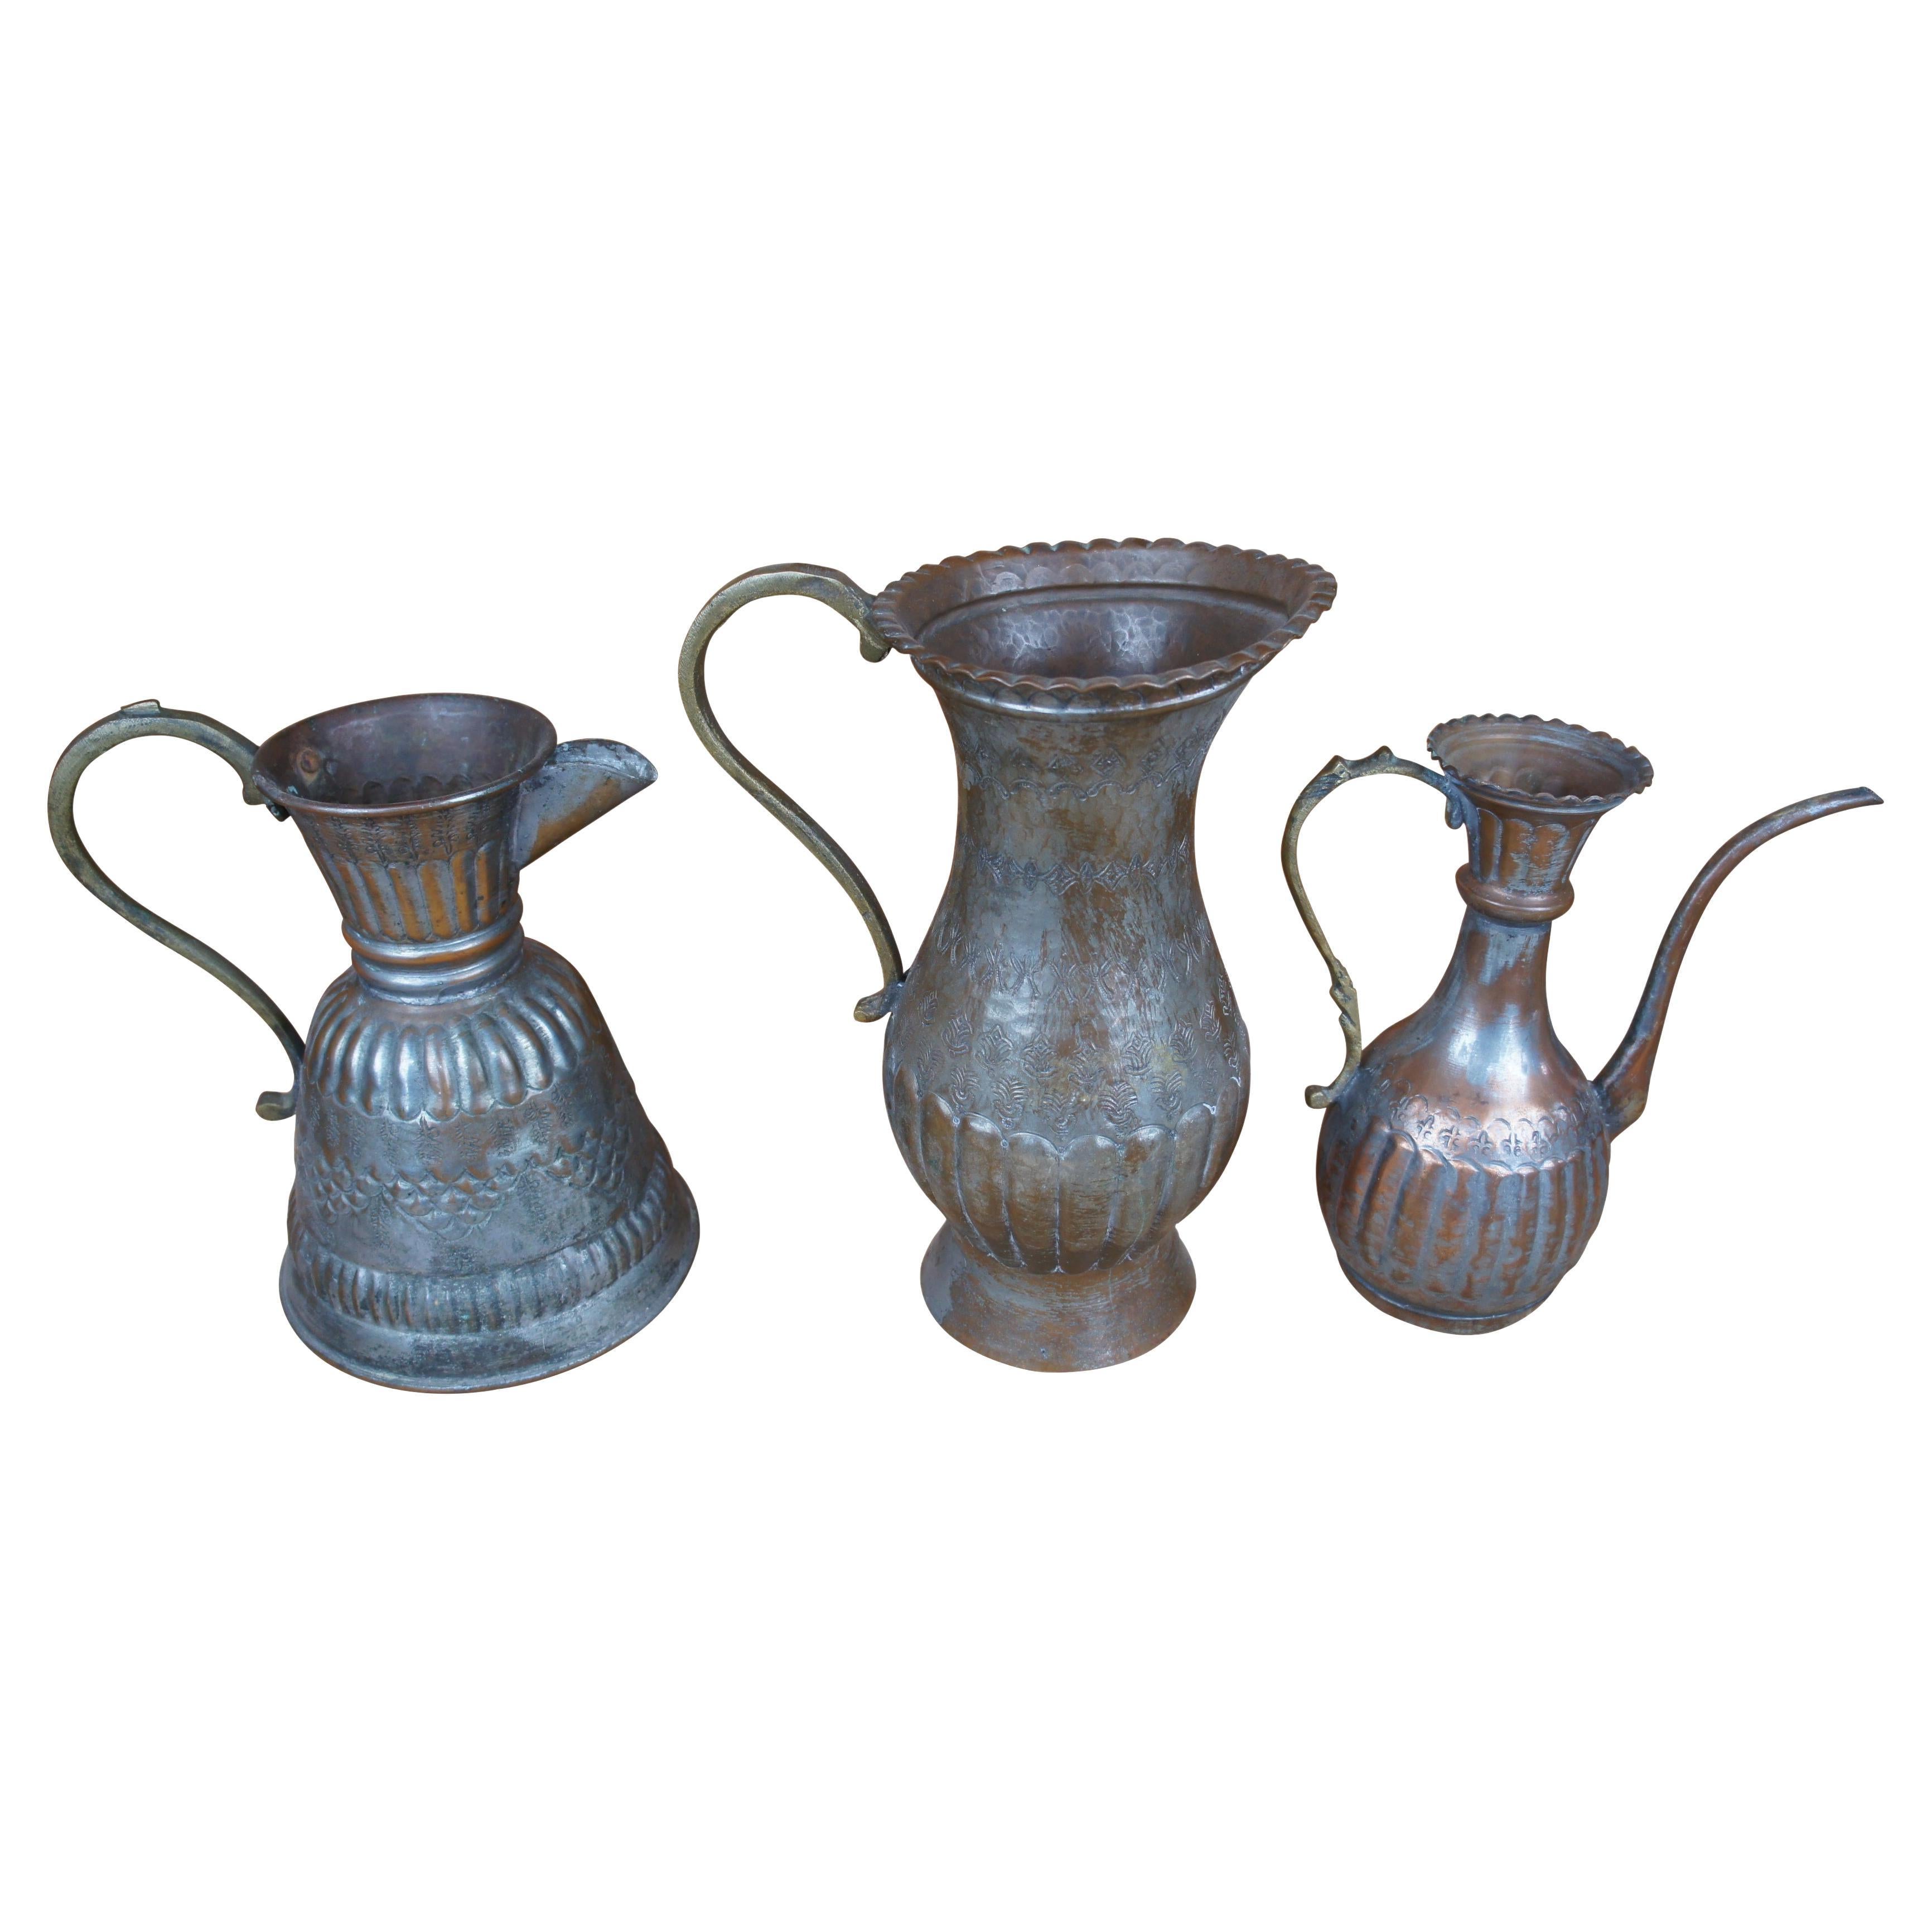 3 Antique Egyptian Hammered Copper Water Can Jug Pitchers Bonsai Gooseneck For Sale